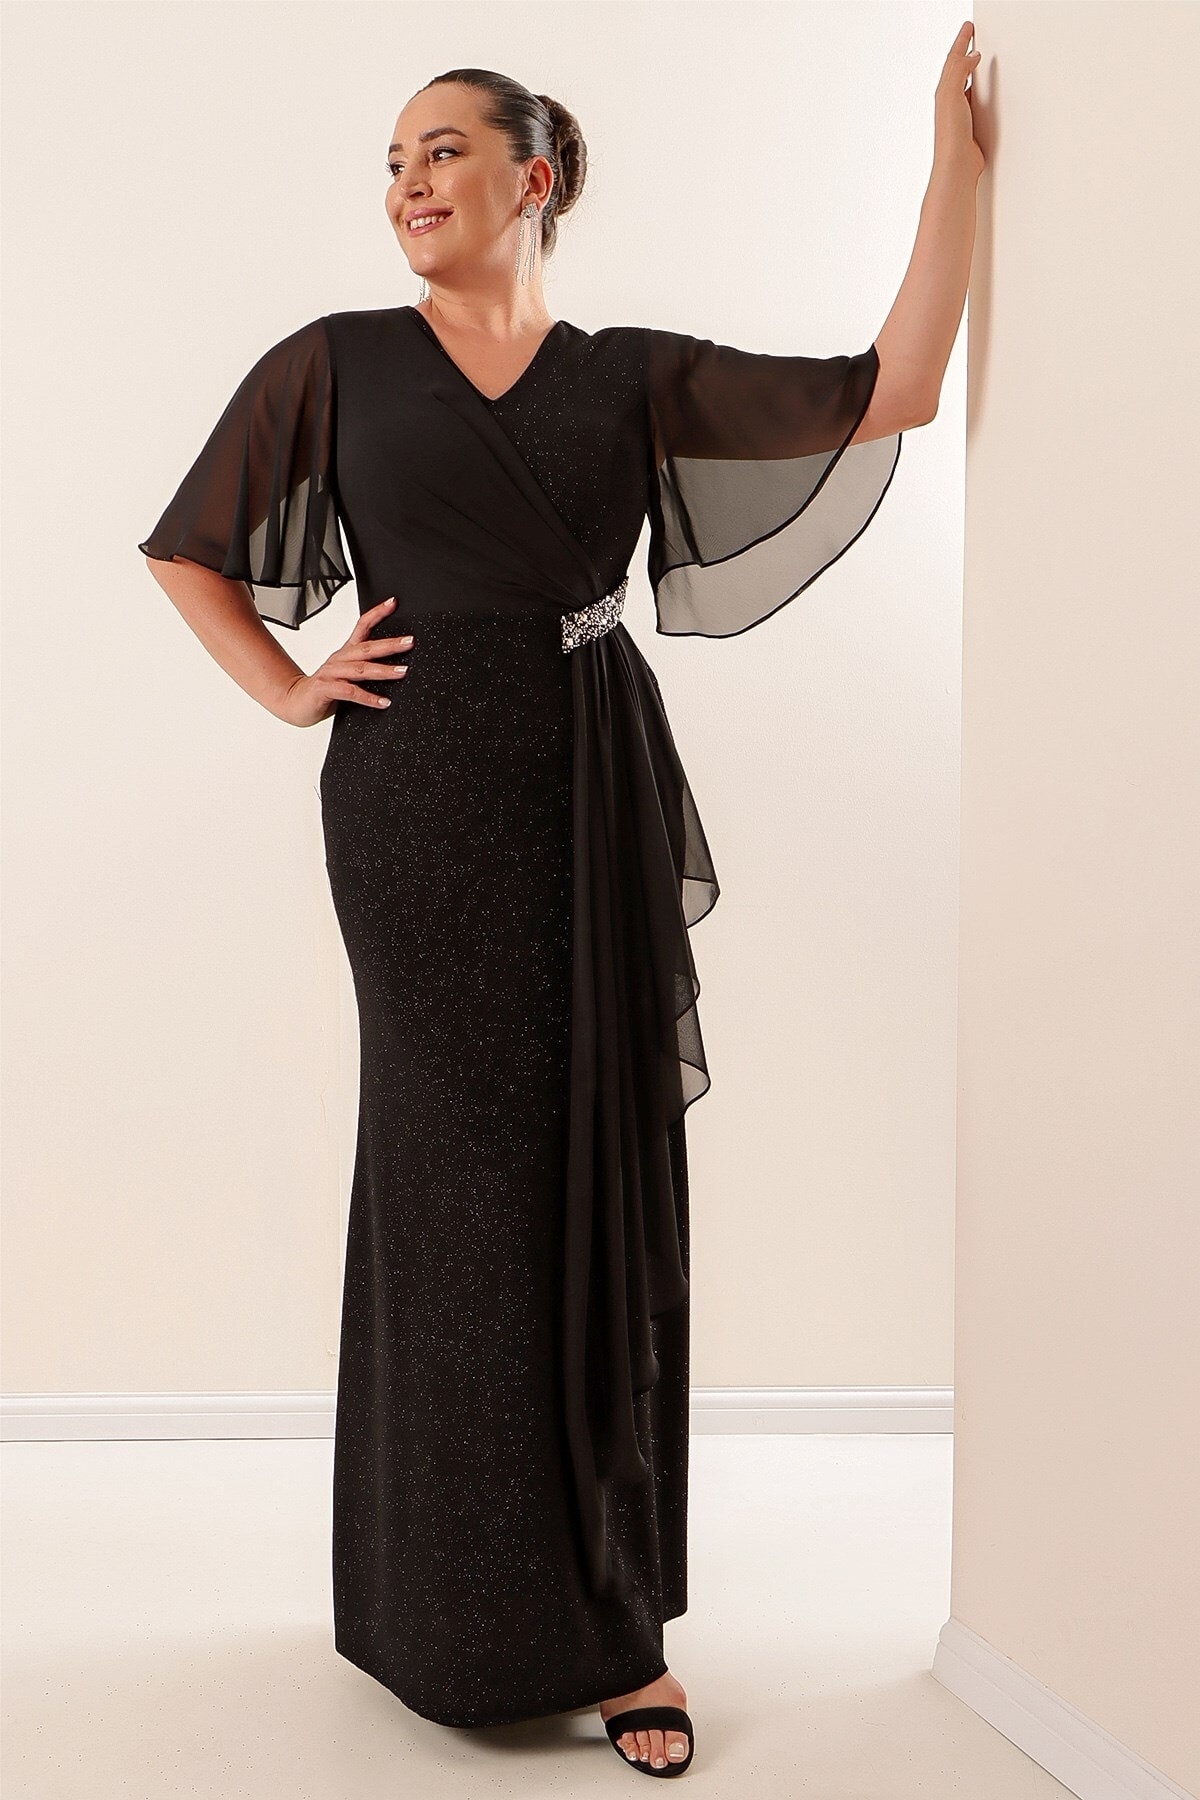 Levně By Saygı Plus Size Glittery Long Dress with Chiffon Sleeves and Stone Accessory Lined Wide Sizes Saks.